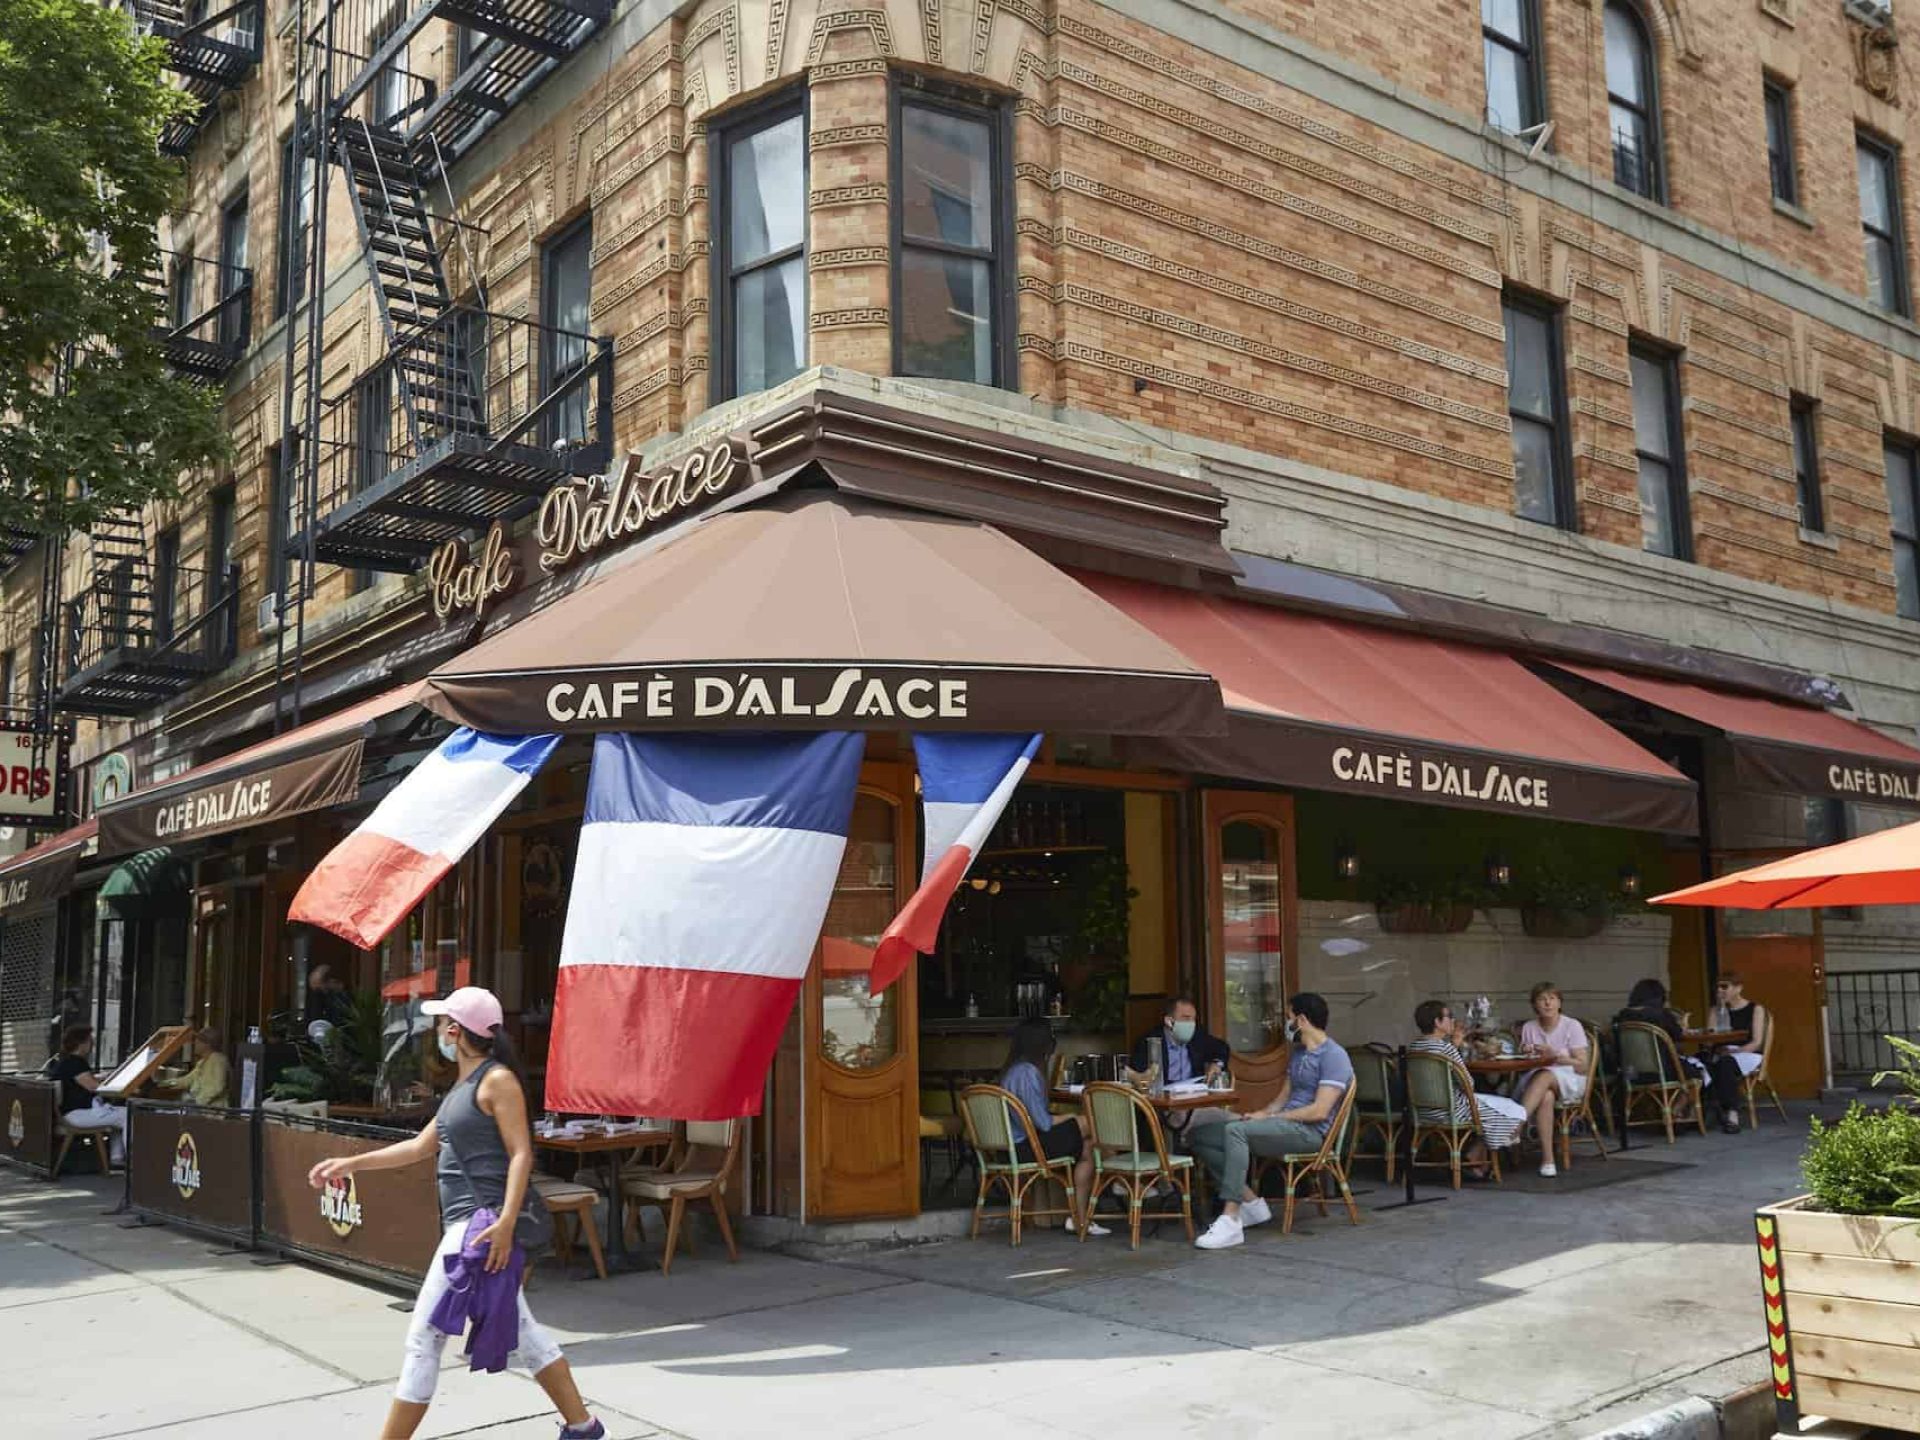 Exterior of the restaurant Cafe Dalsace with a red awning, outdoor seating and french flags hanging from the awning.